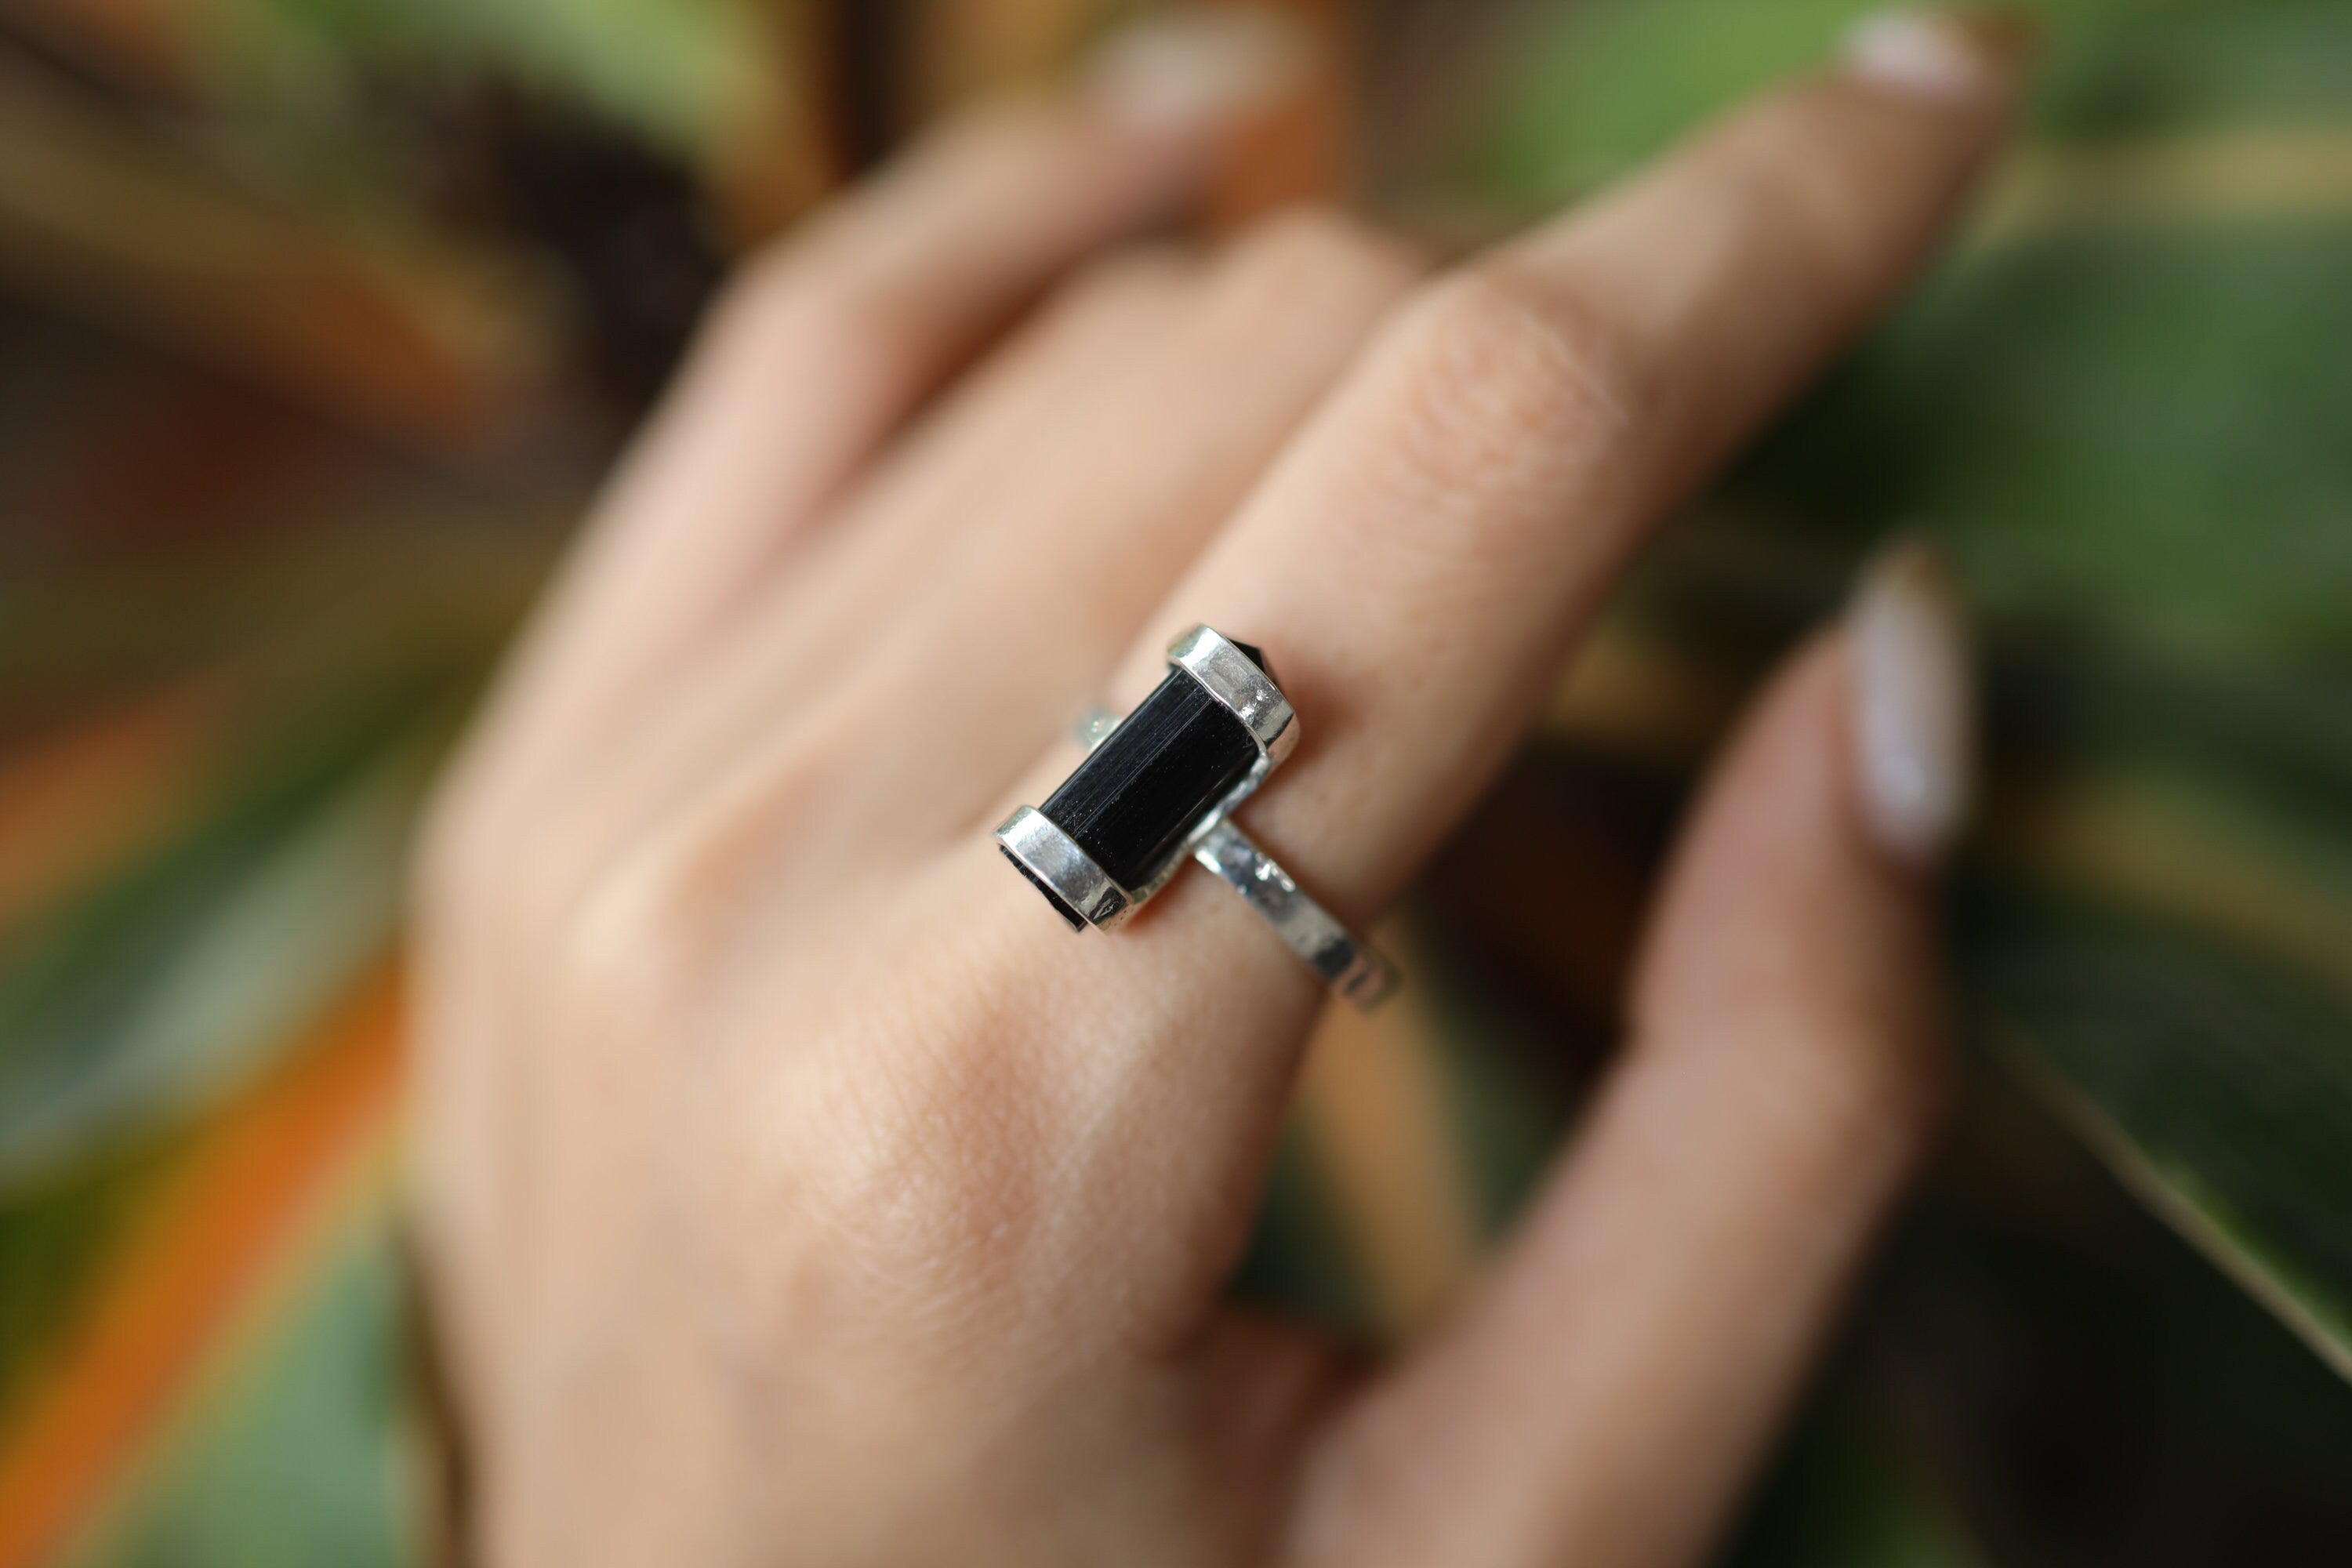 Midnight Shard Terminated Black Tourmaline Ring-Hammered & Shiny Finish - Sterling Silver Ring - Size 7 3/4 US